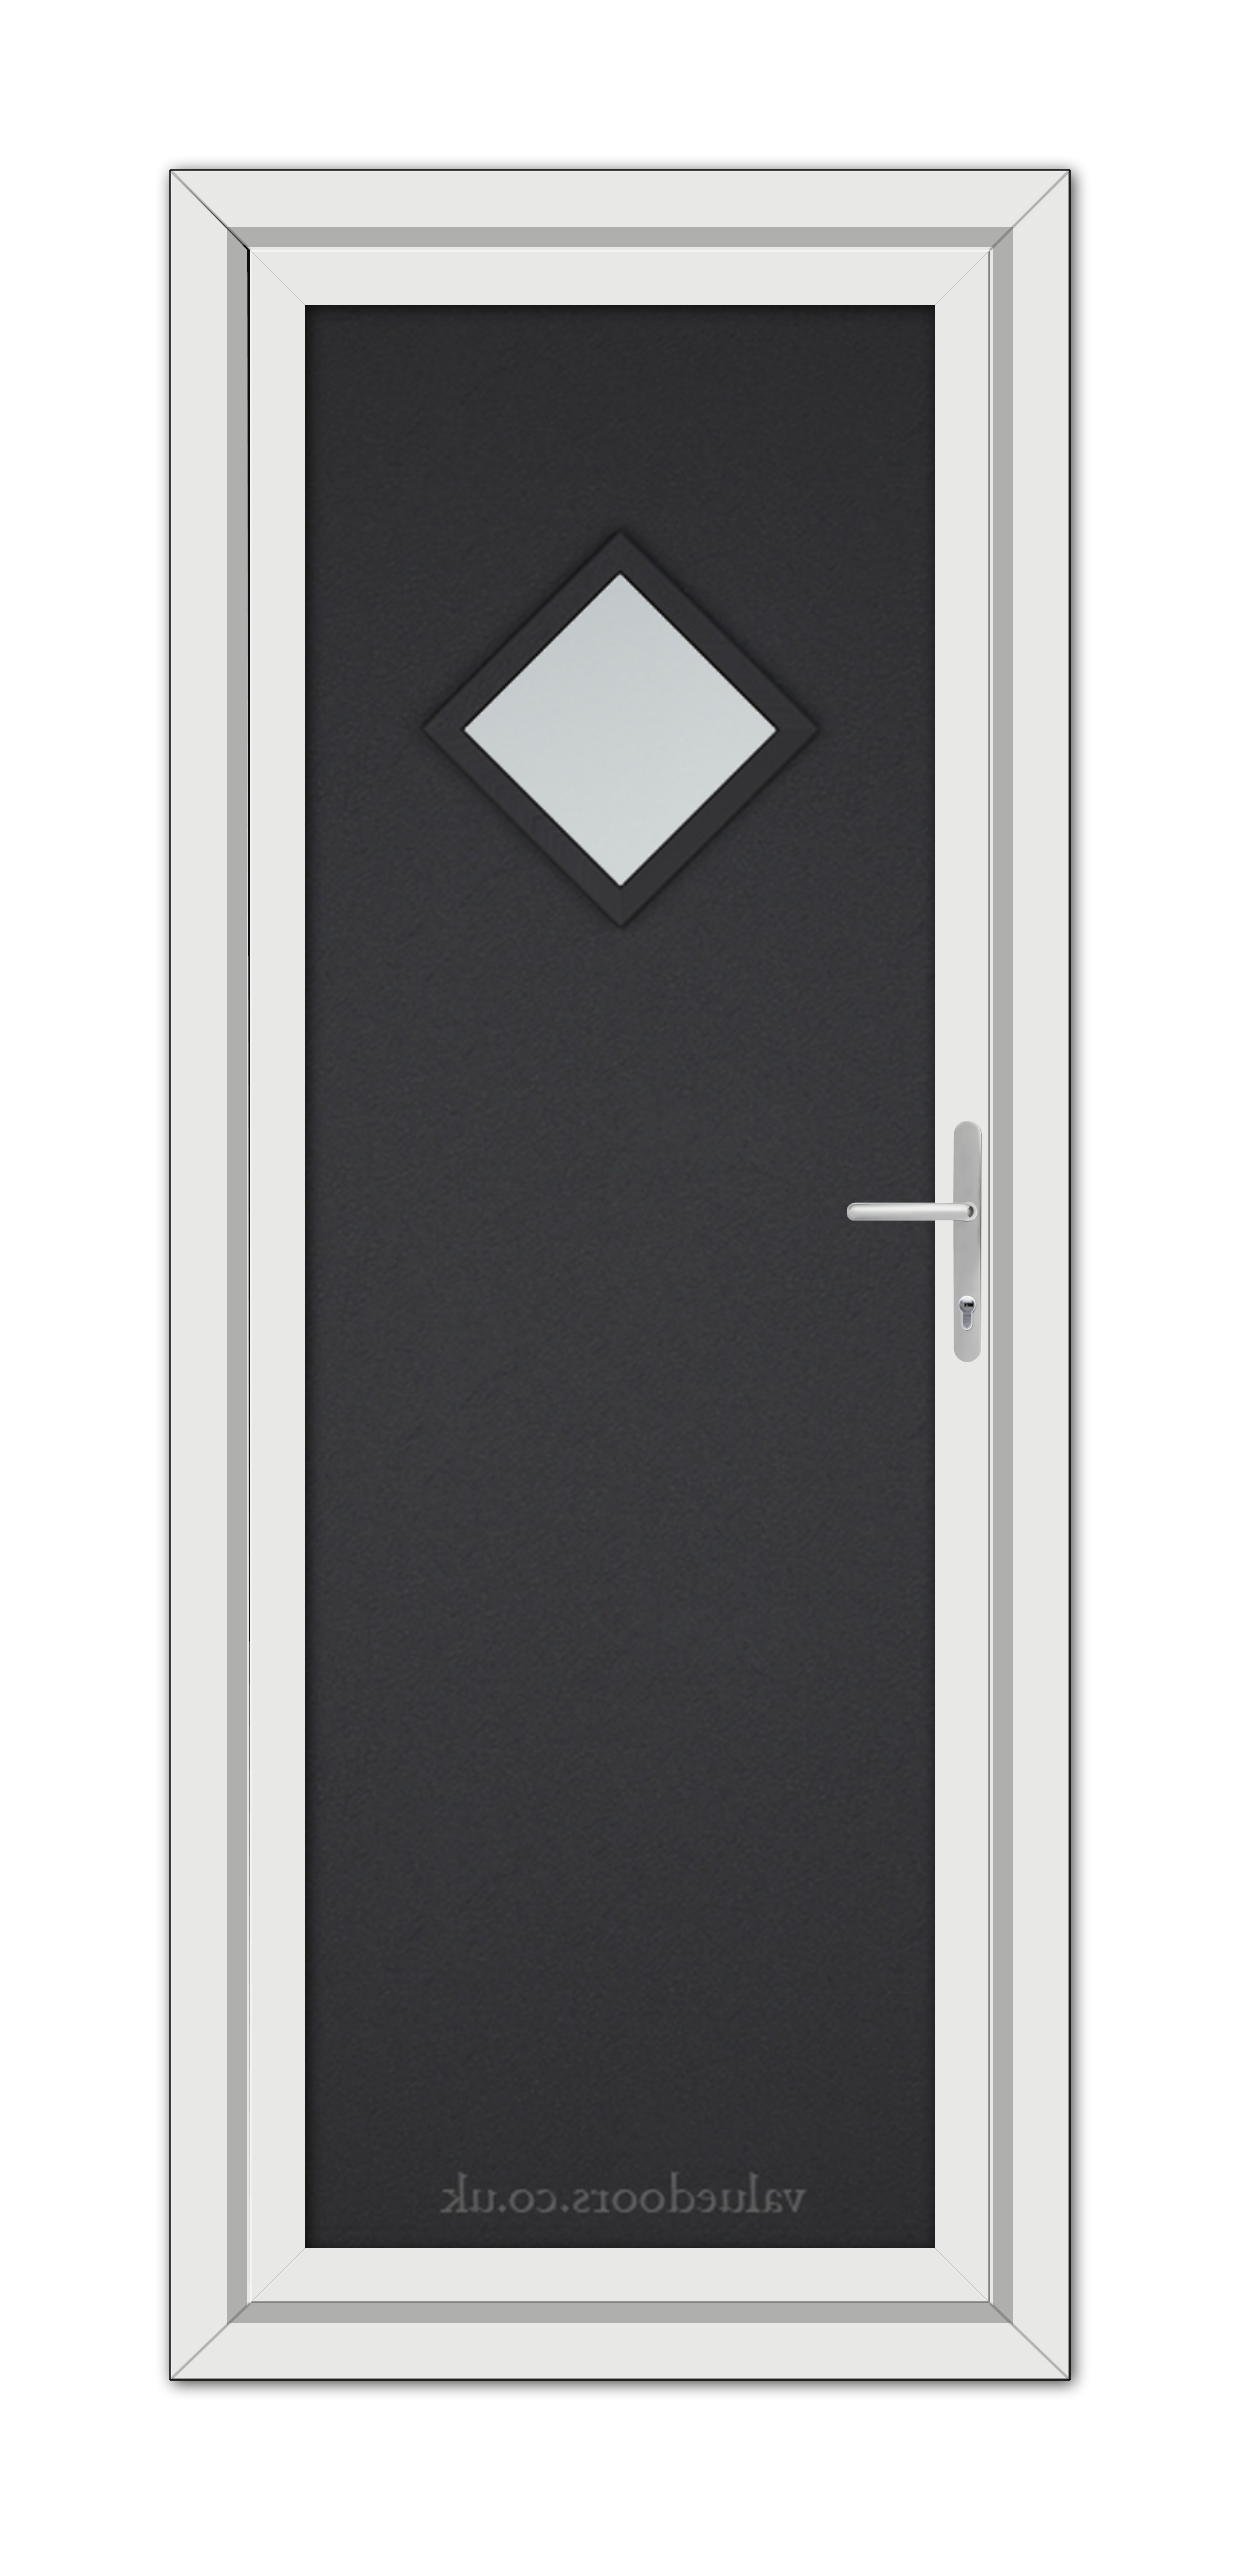 A Black Brown Modern 5131 uPVC door with a white frame, vertical handle on the right, and a small diamond-shaped window near the top.